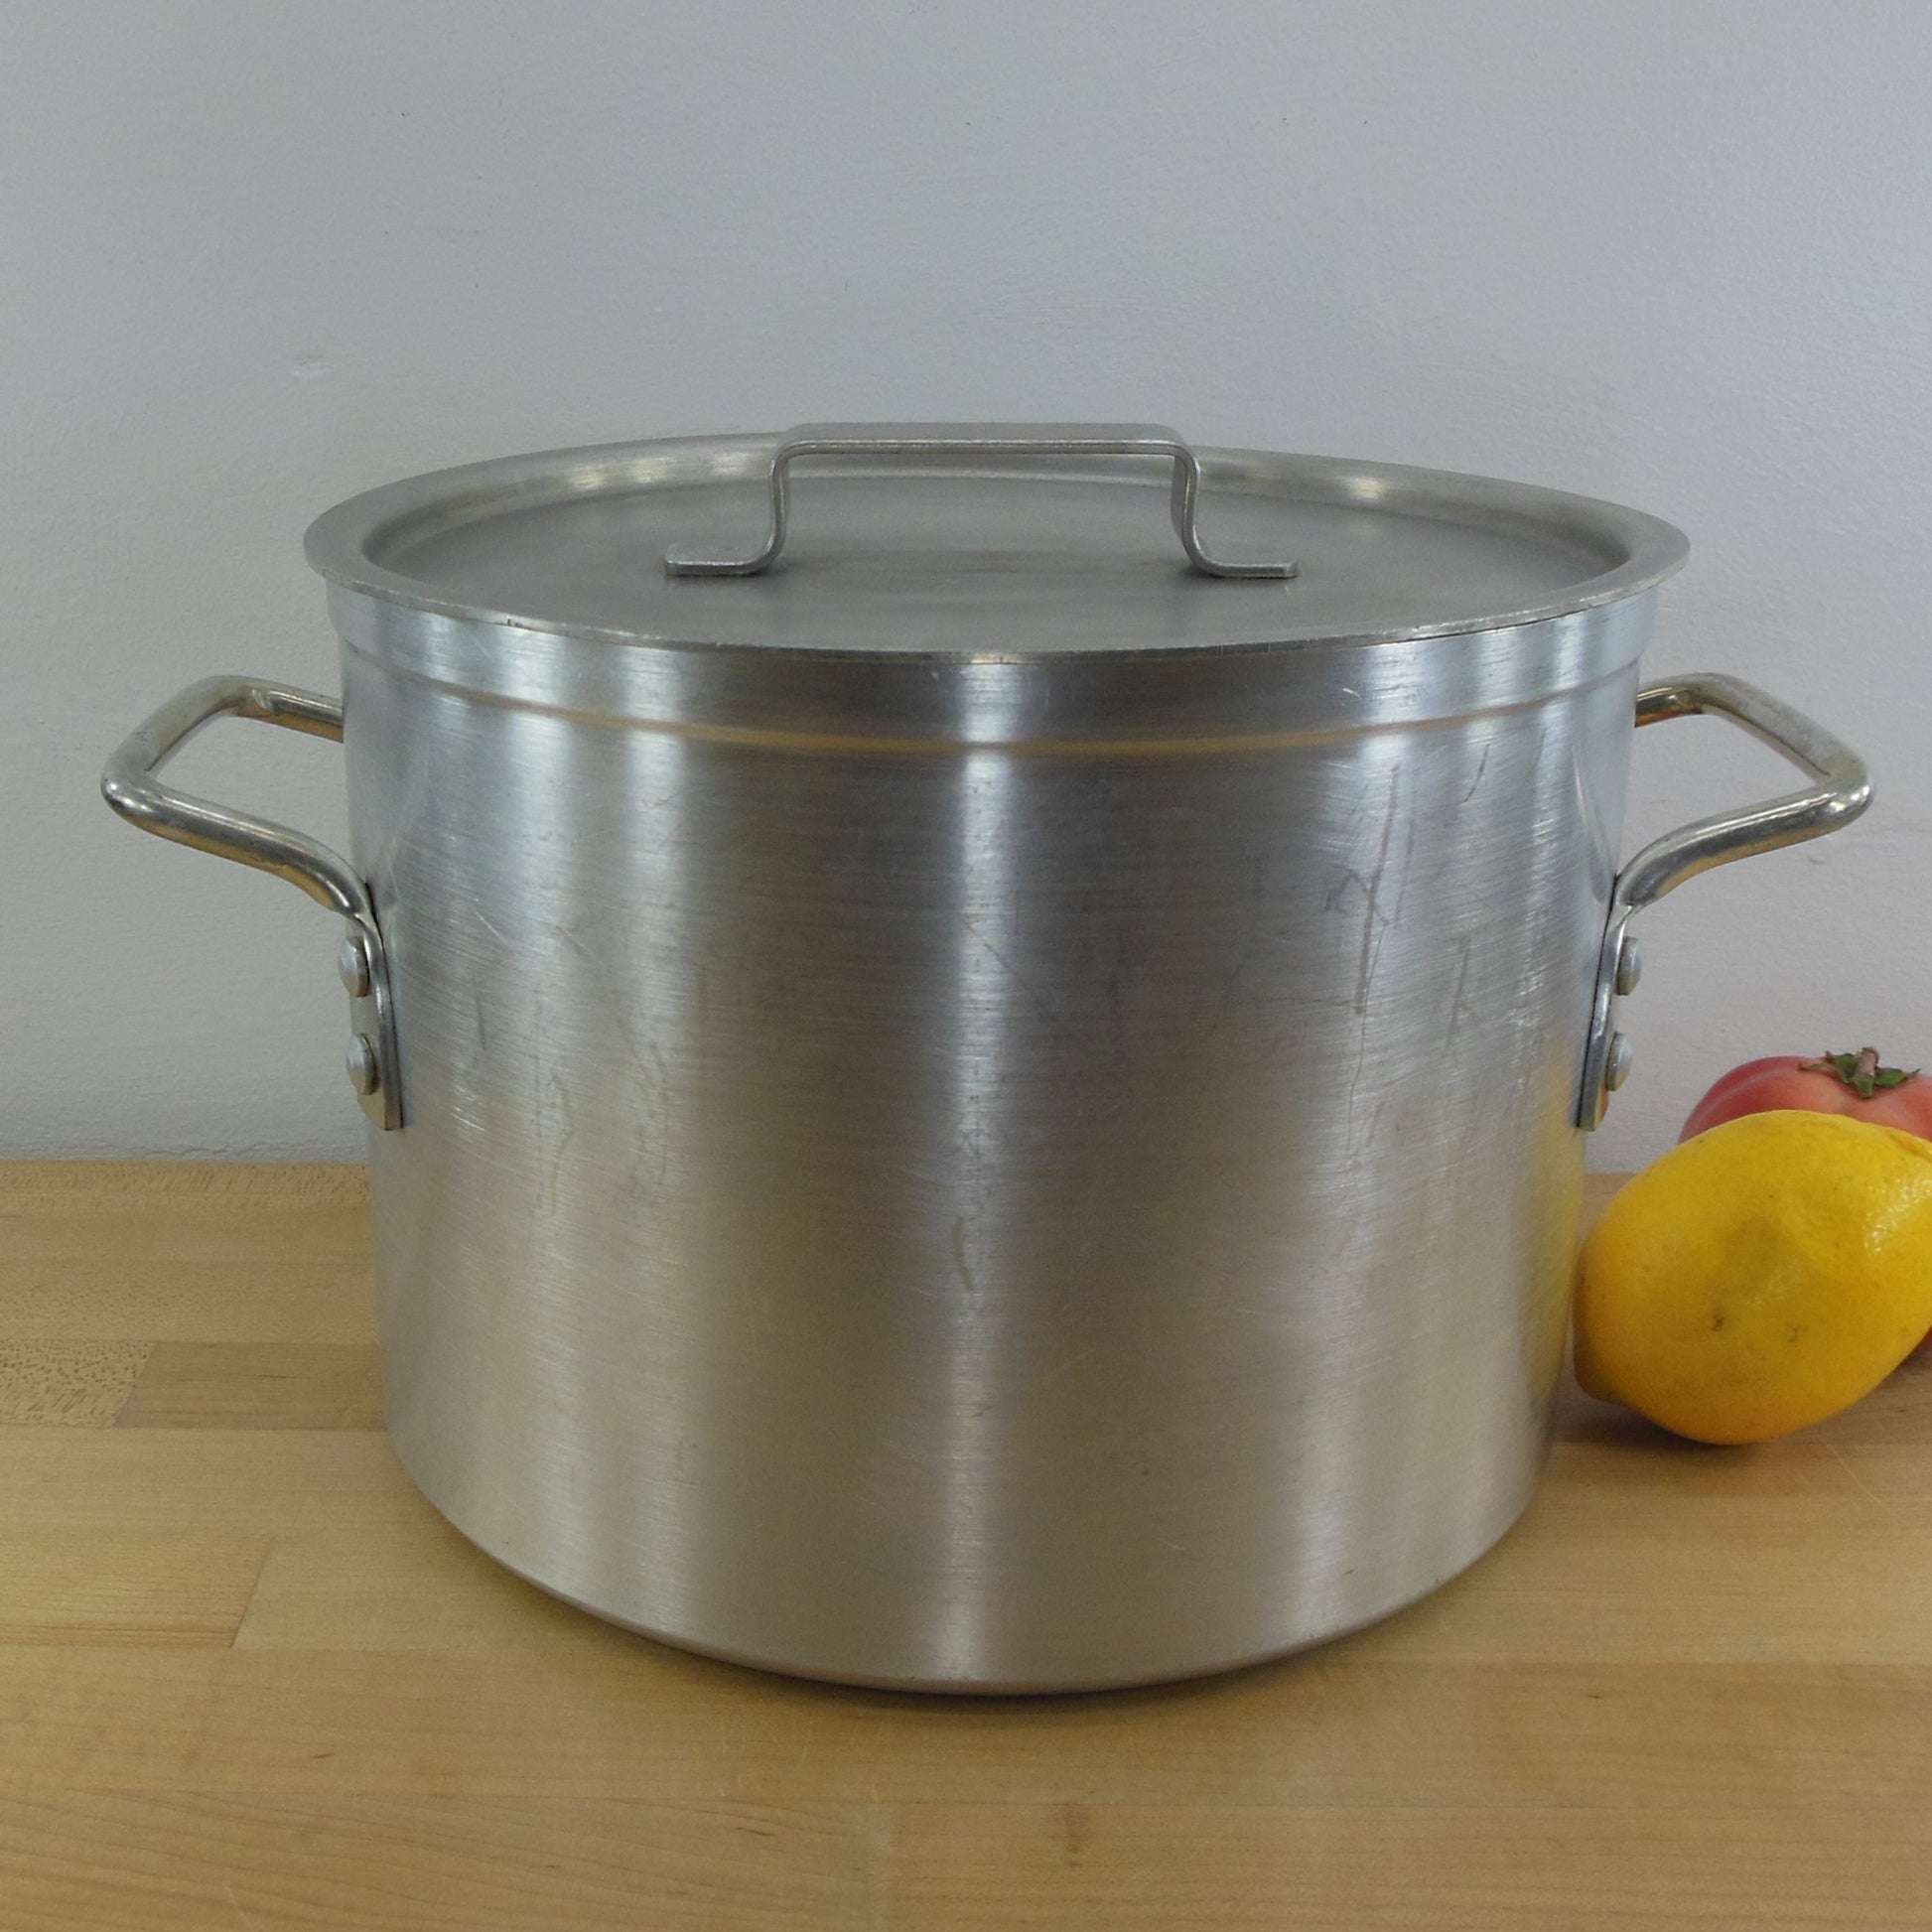 Leyse USA NSF Commercial Aluminum 10 Quart Stock Pot with Lid #5310